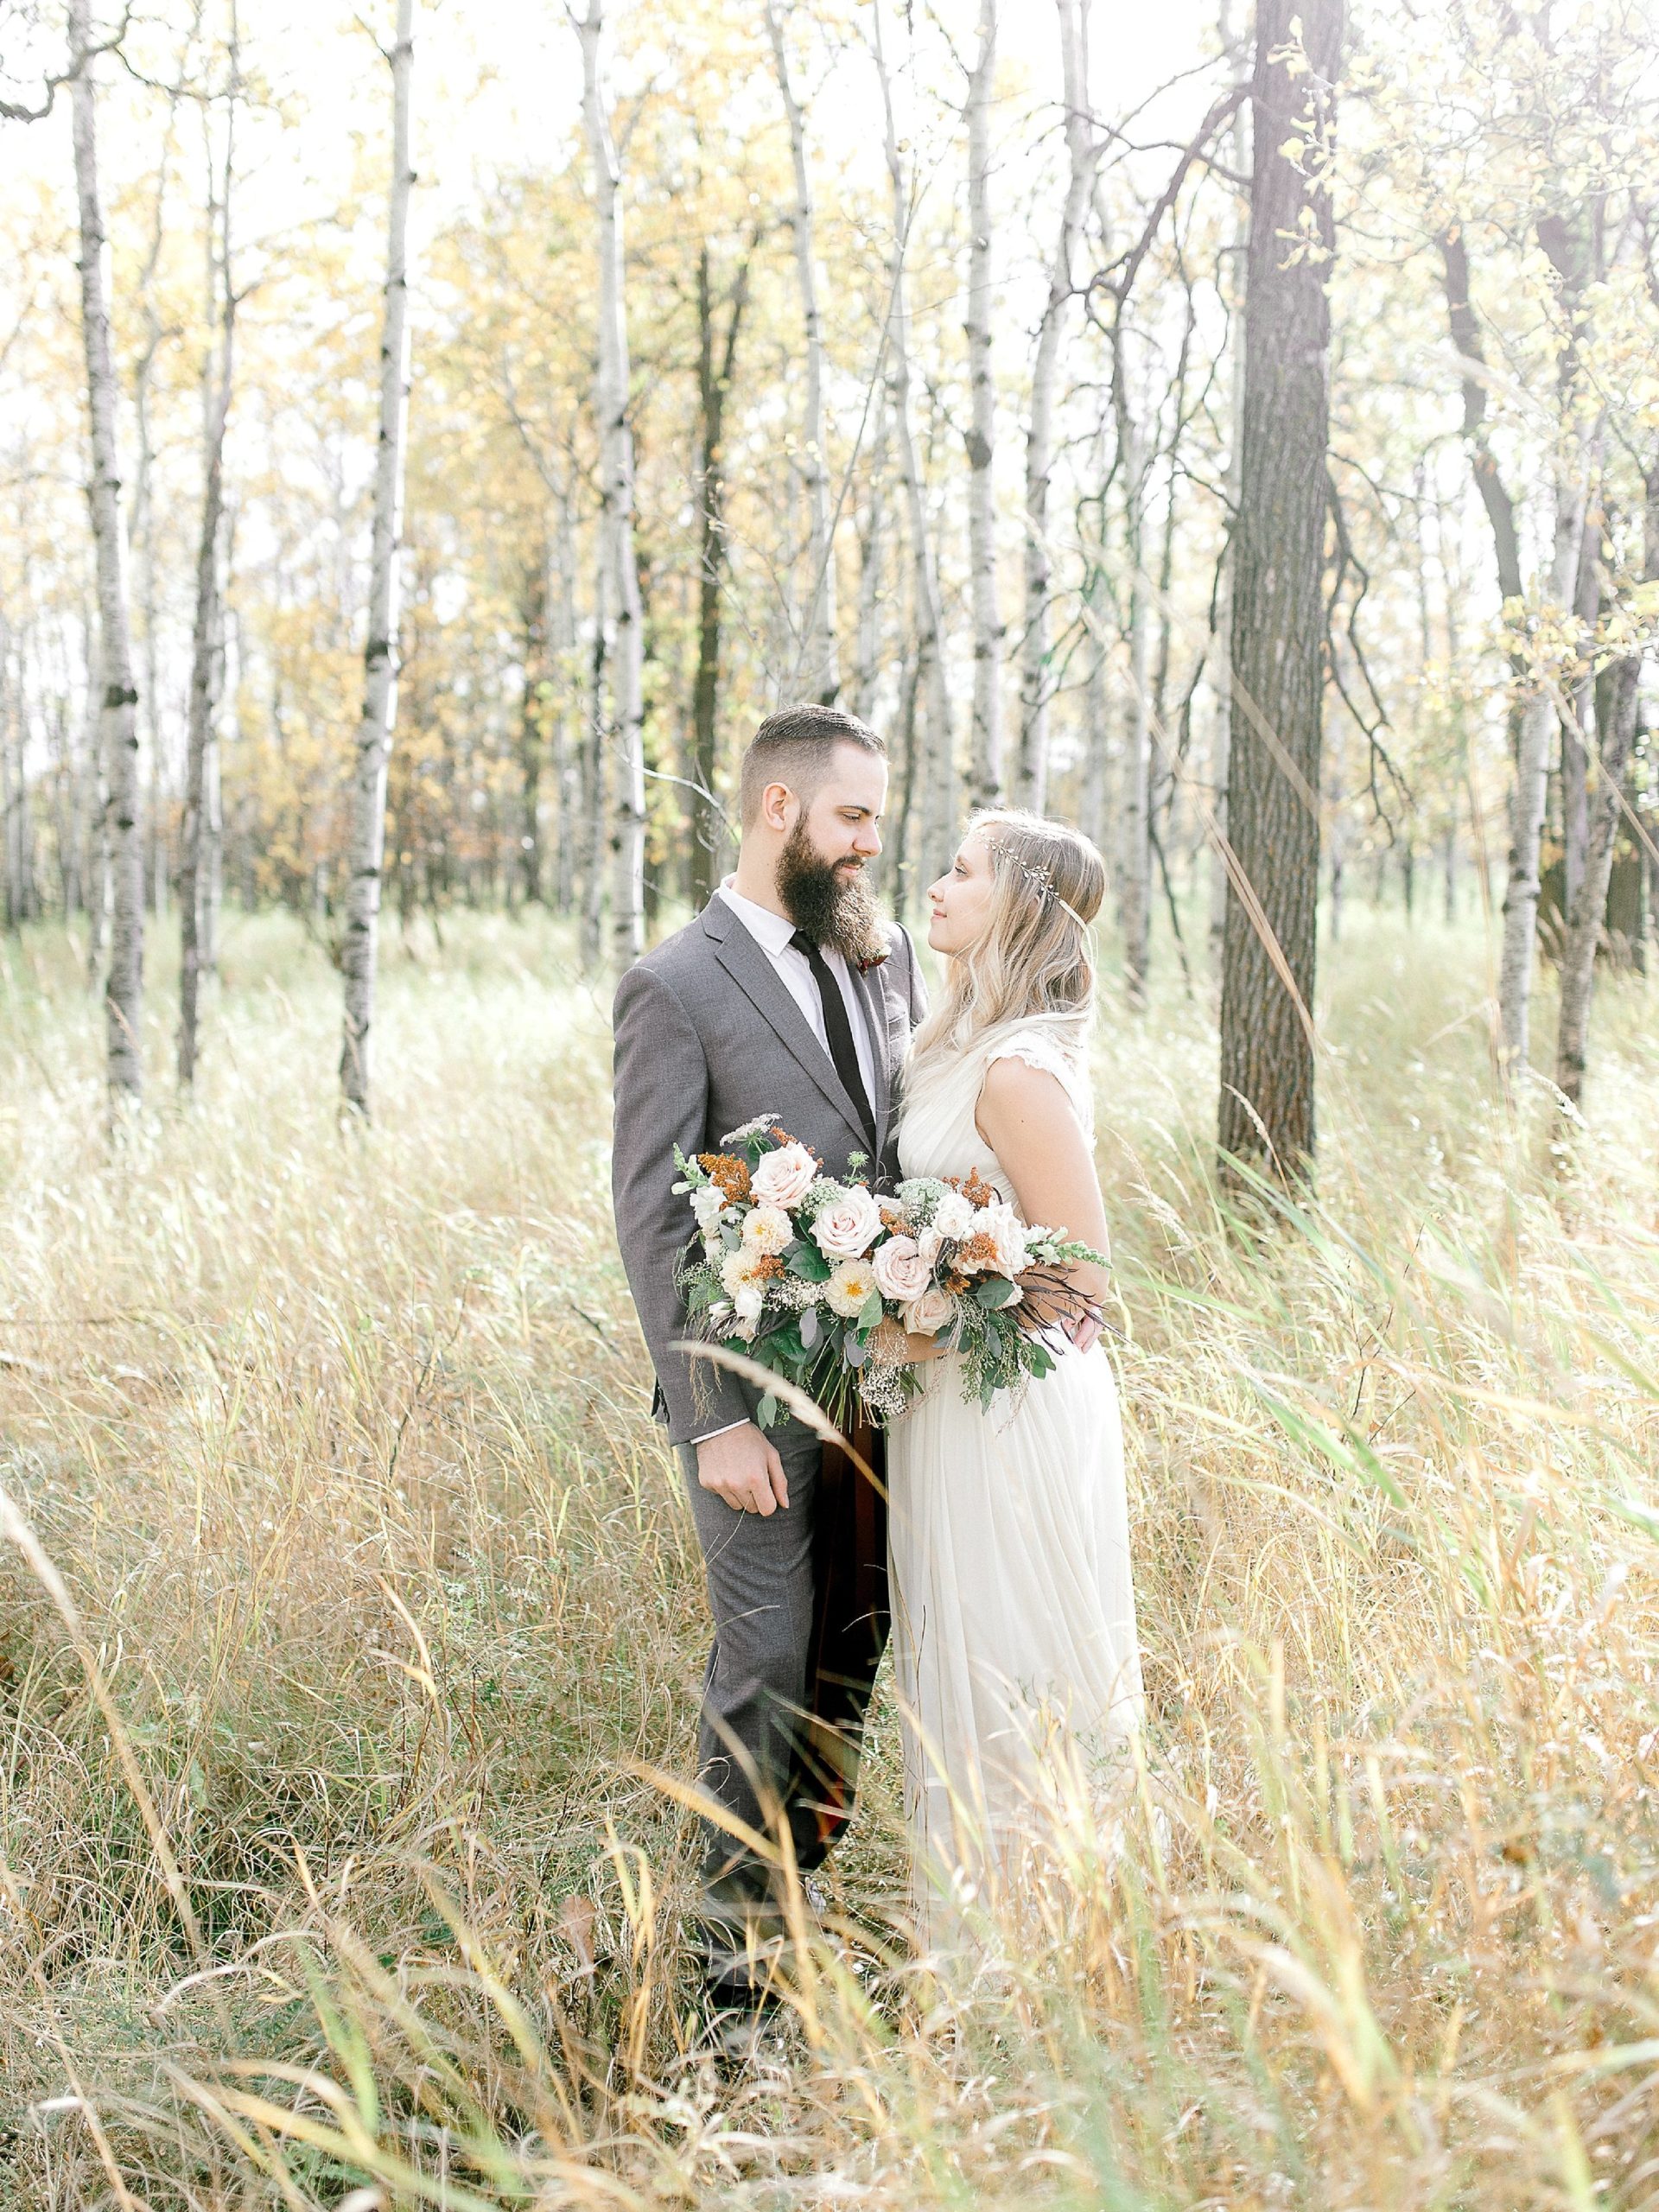 Wedding photos in the forest, Canadian Wedding Photographer, Whimsical wedding photos, Fall wedding photo ideas, Winnipeg Wedding Photographer